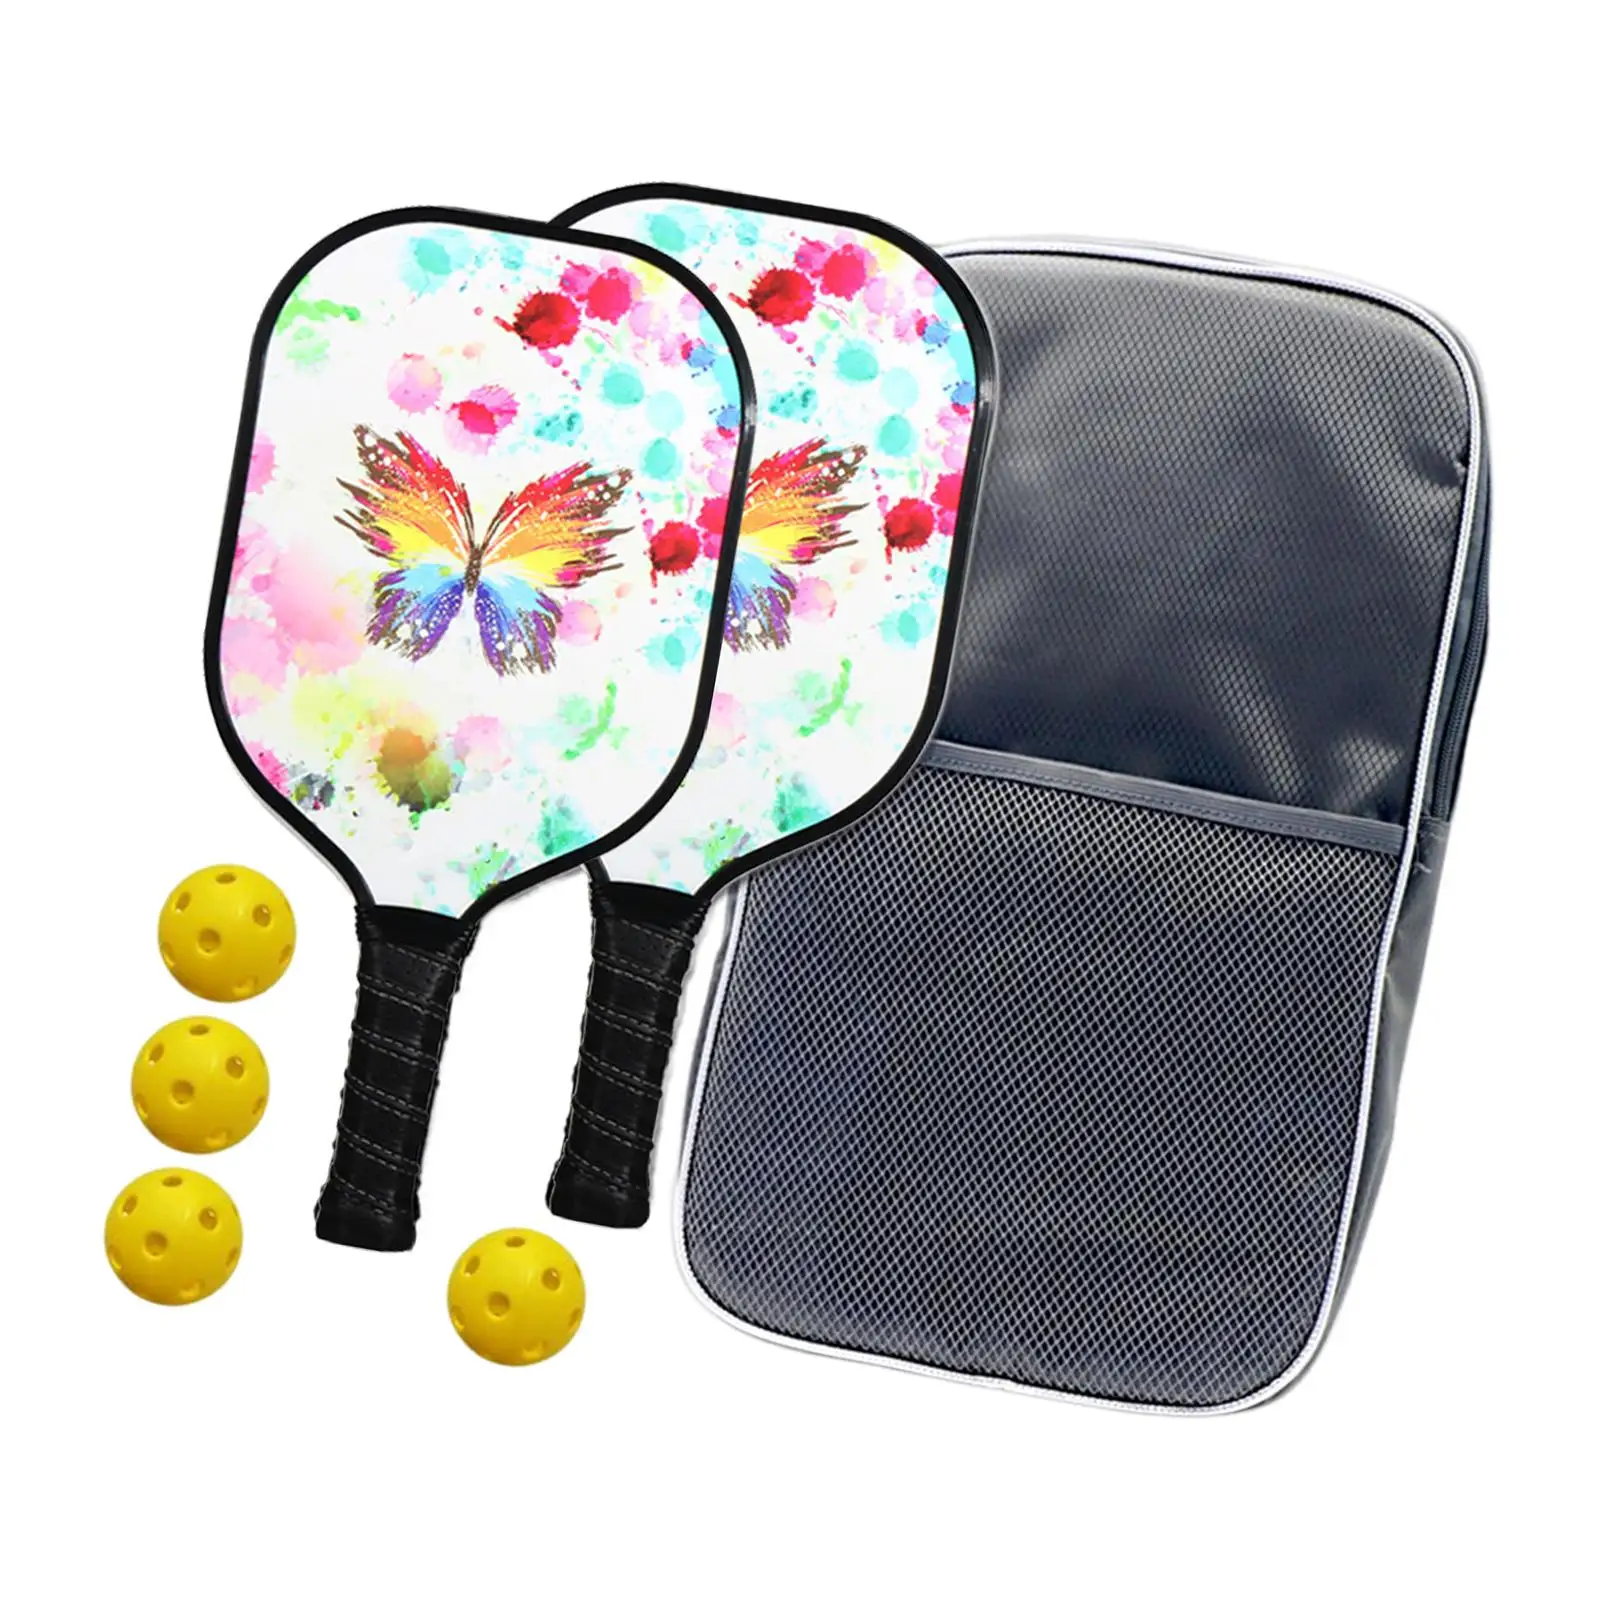 Premium Pickleball Paddles Set 2 Rackets 4 Pickleball Balls and Bag for Indoor and Outdoor Tournament